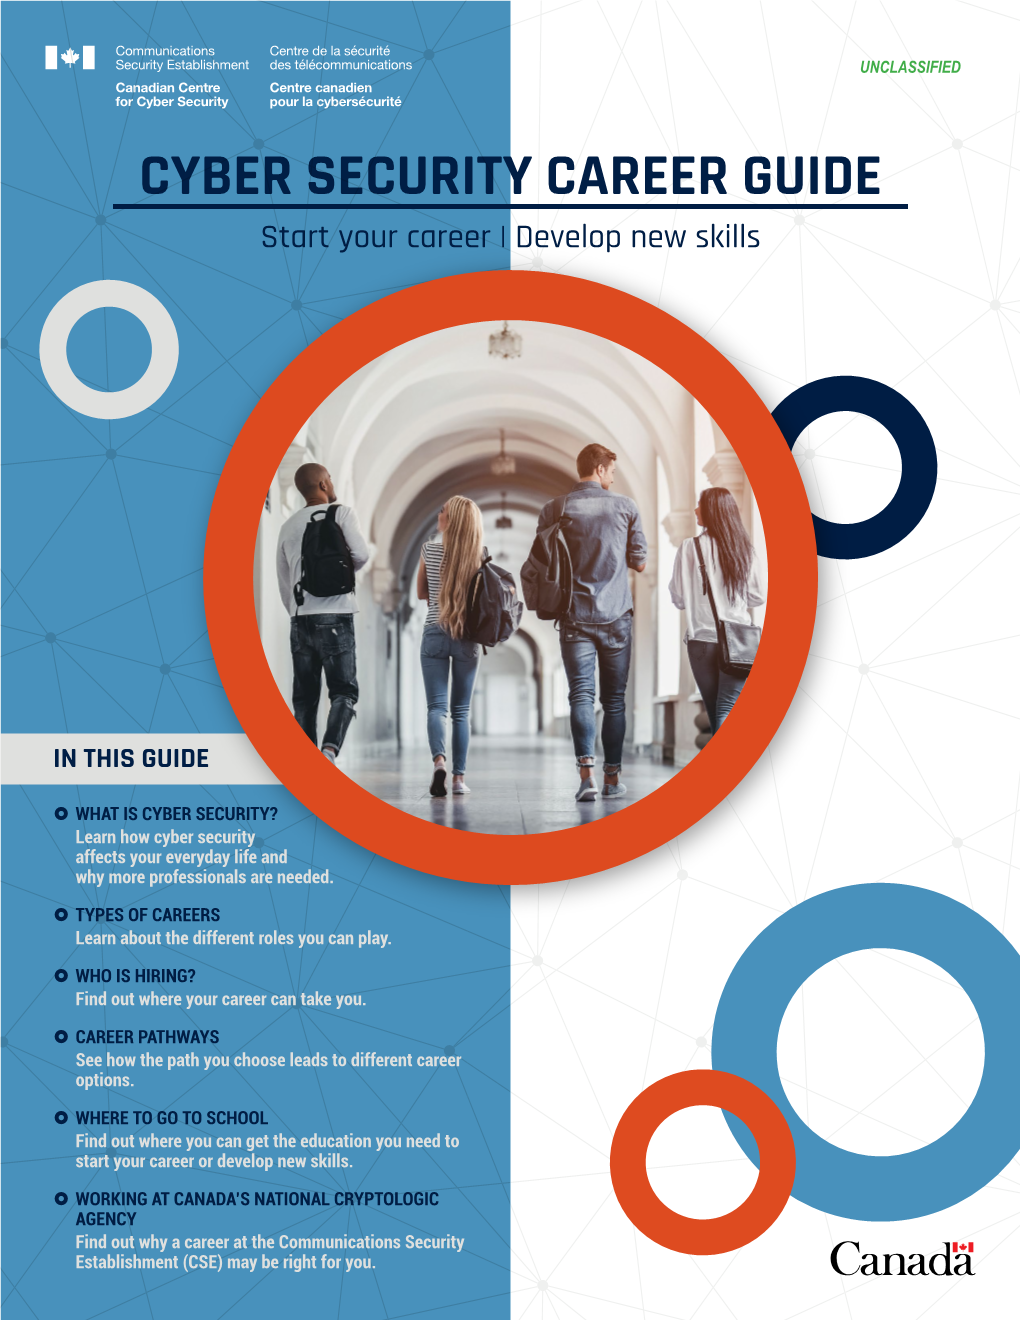 CYBER SECURITY CAREER GUIDE Start Your Career | Develop New Skills